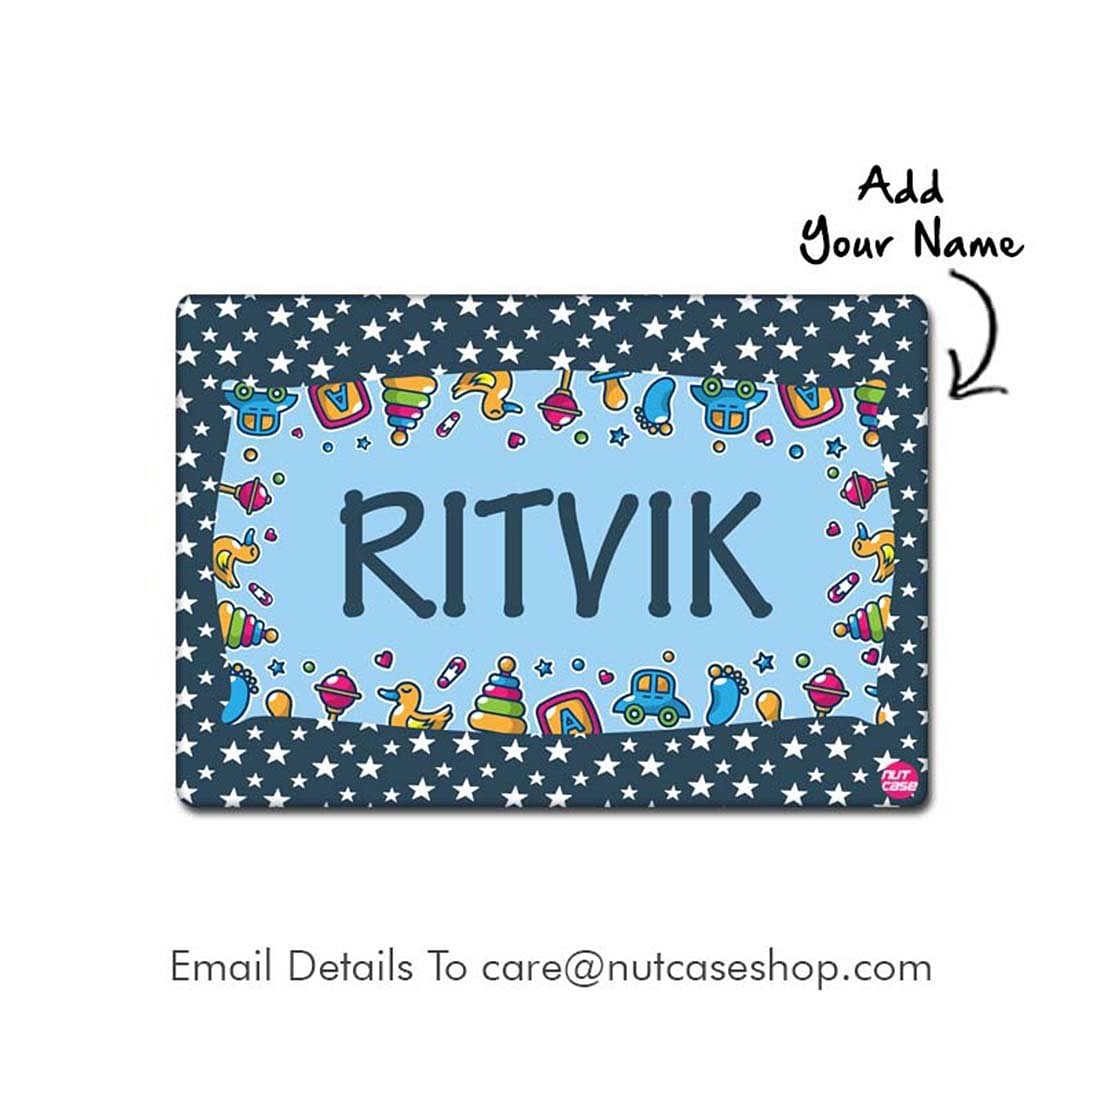 Personalized Return Gift Ideas for 6 Year Olds Kids Table Mat - Toy Nutcase